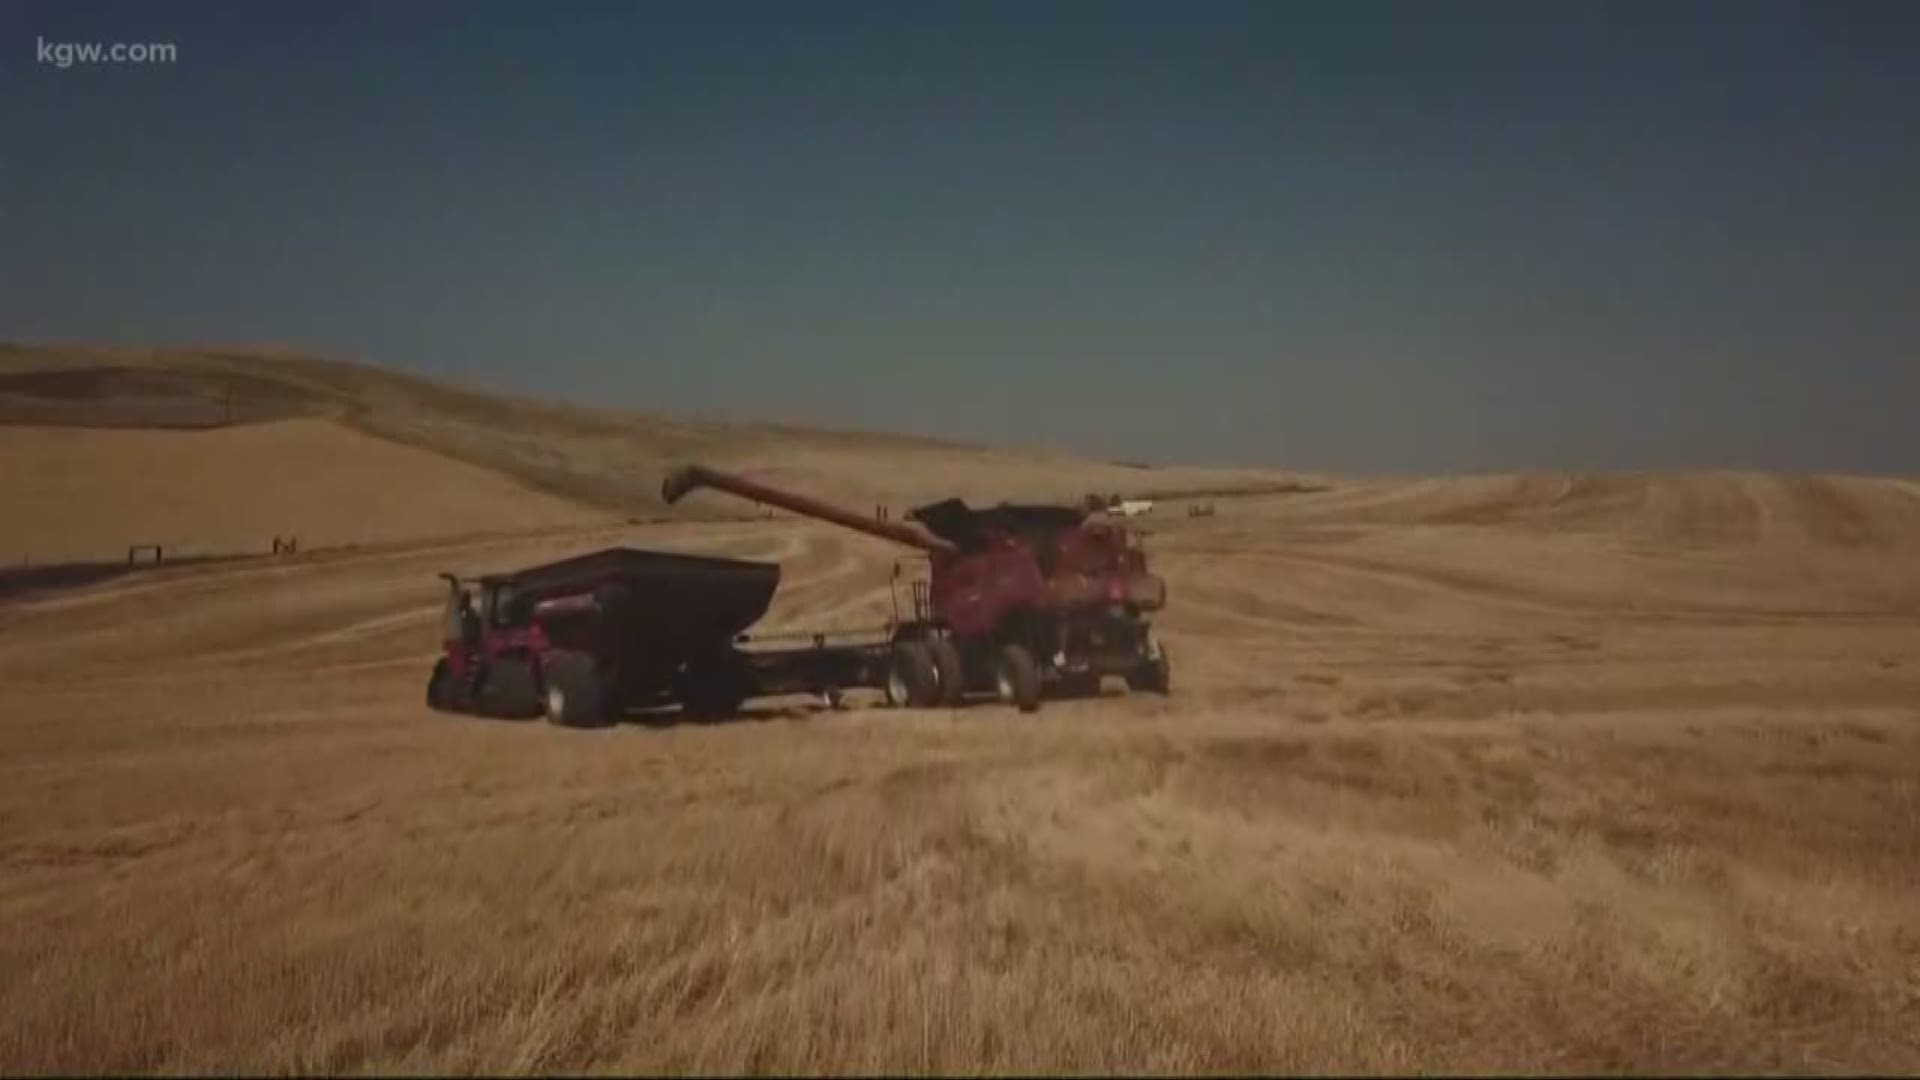 One year later. A look a the wheat harvest near Dufur, Oregon, a year after a huge fire.